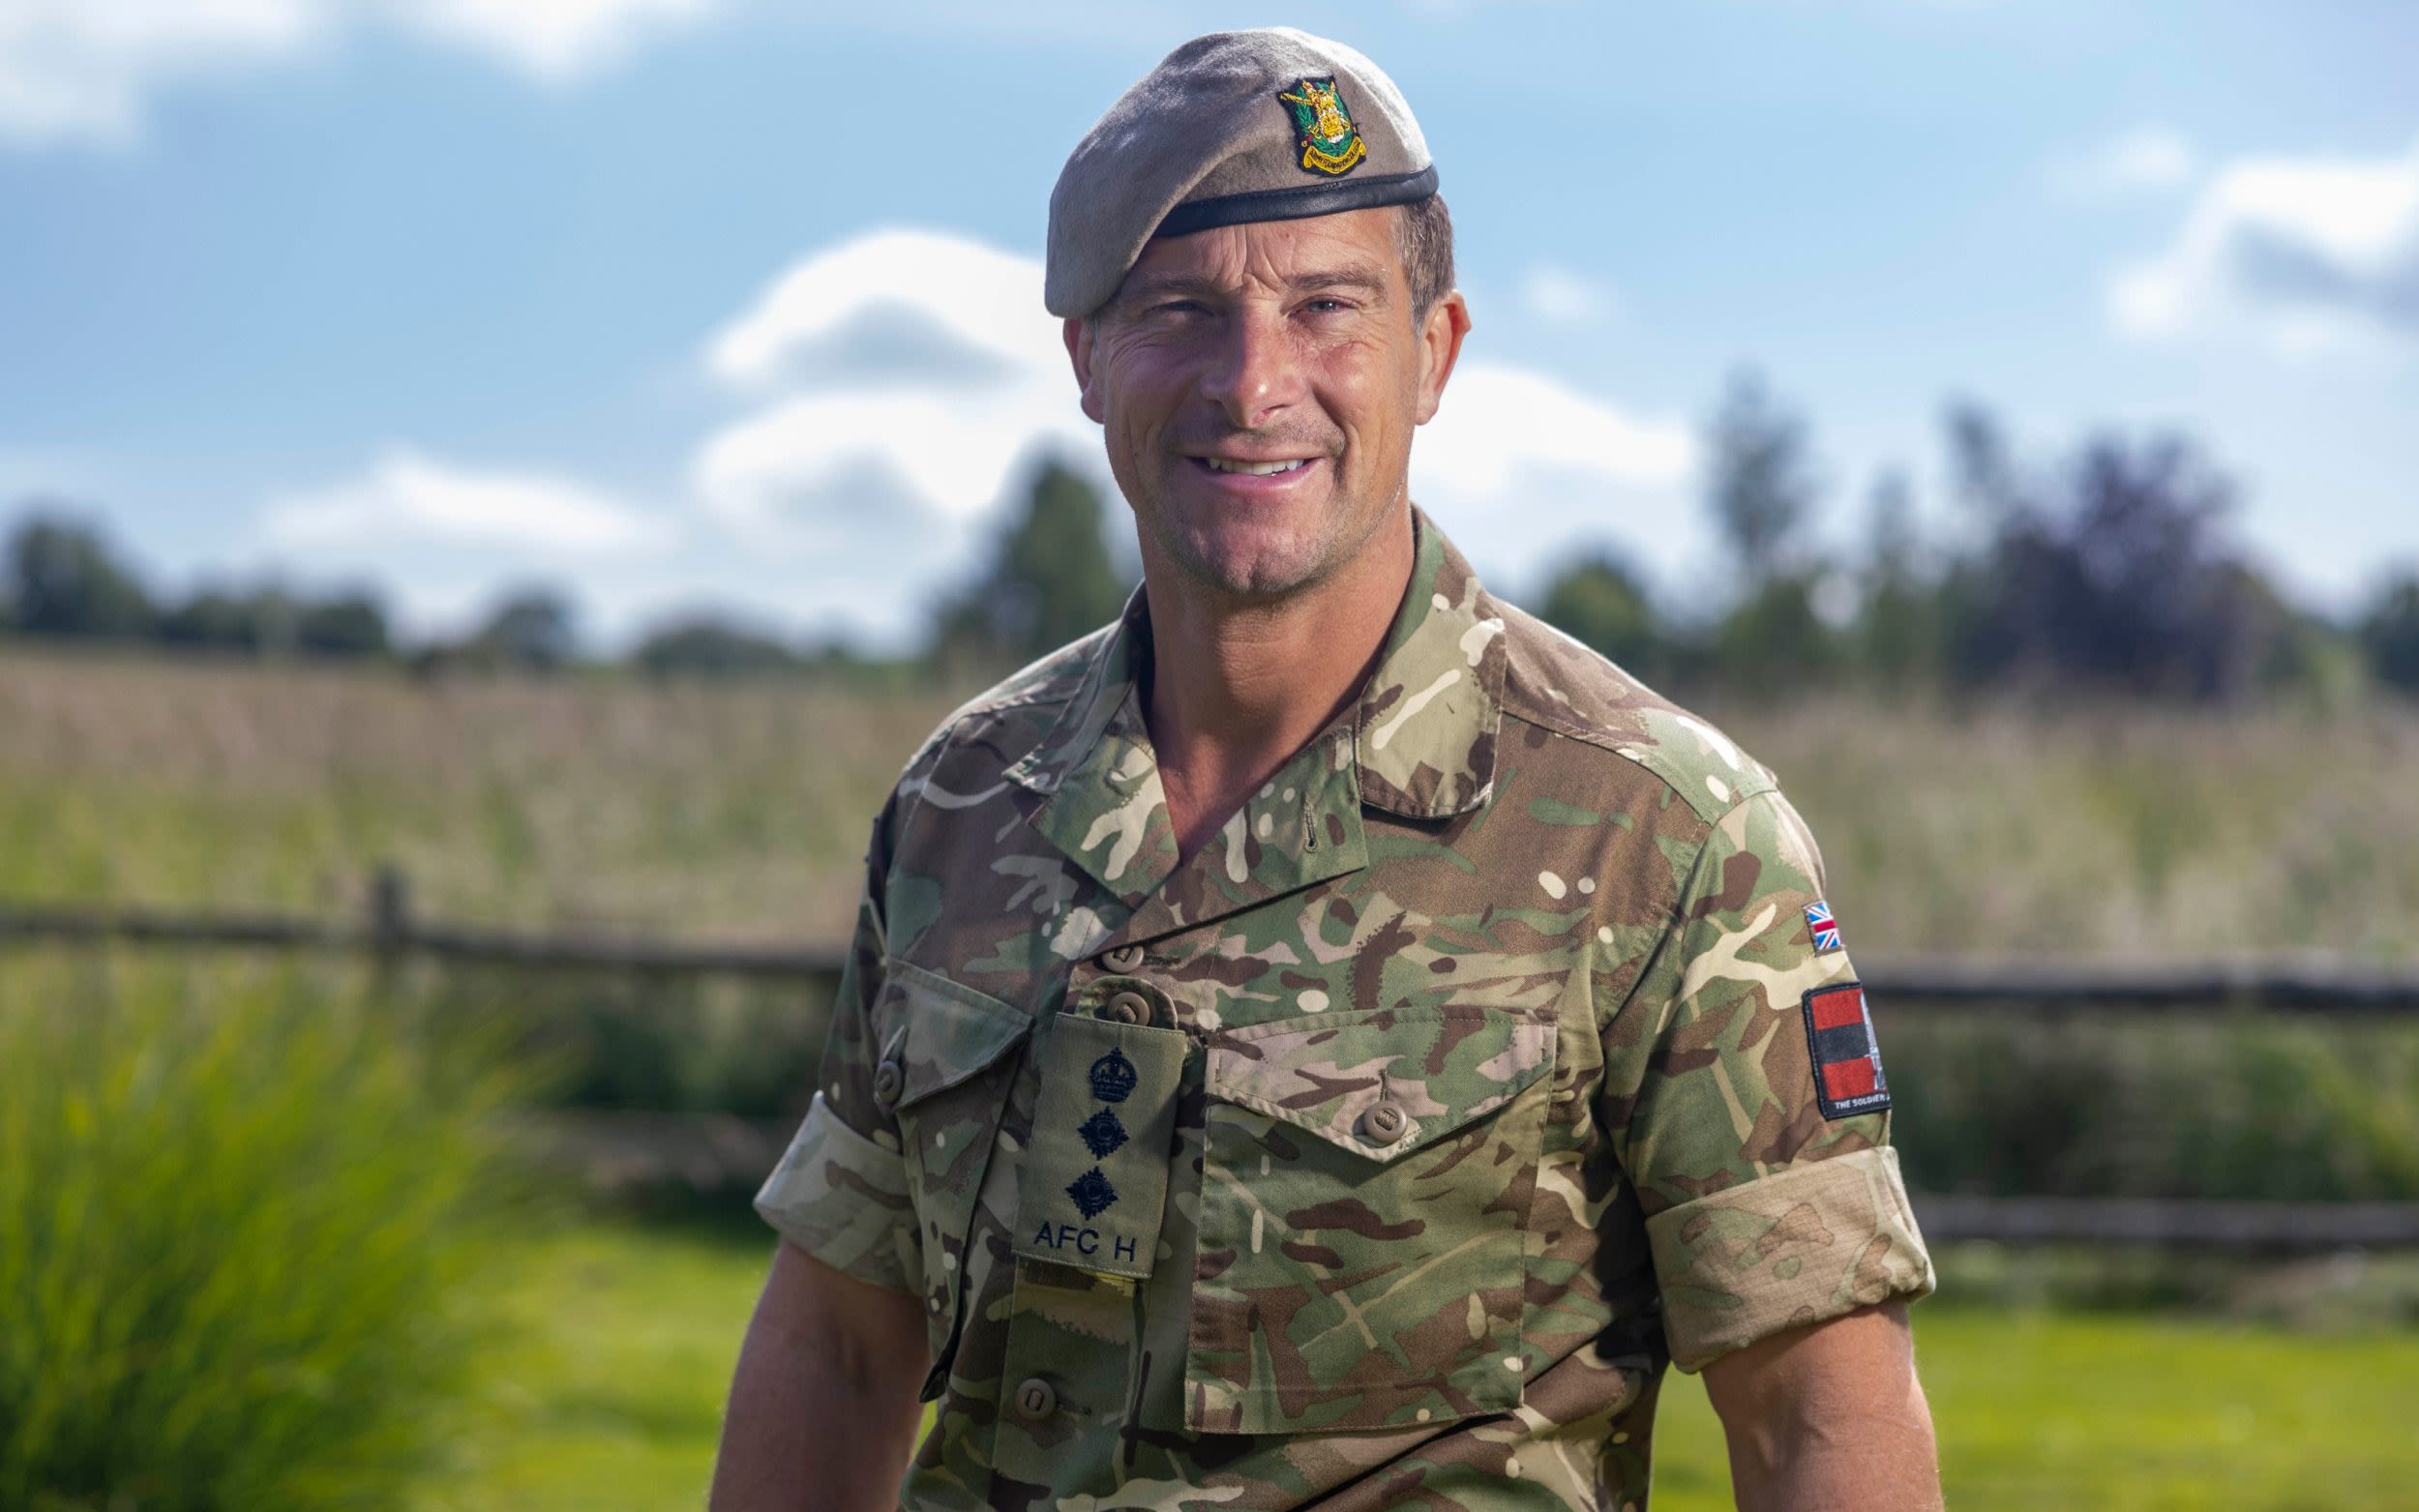 King appoints Bear Grylls to new Army role